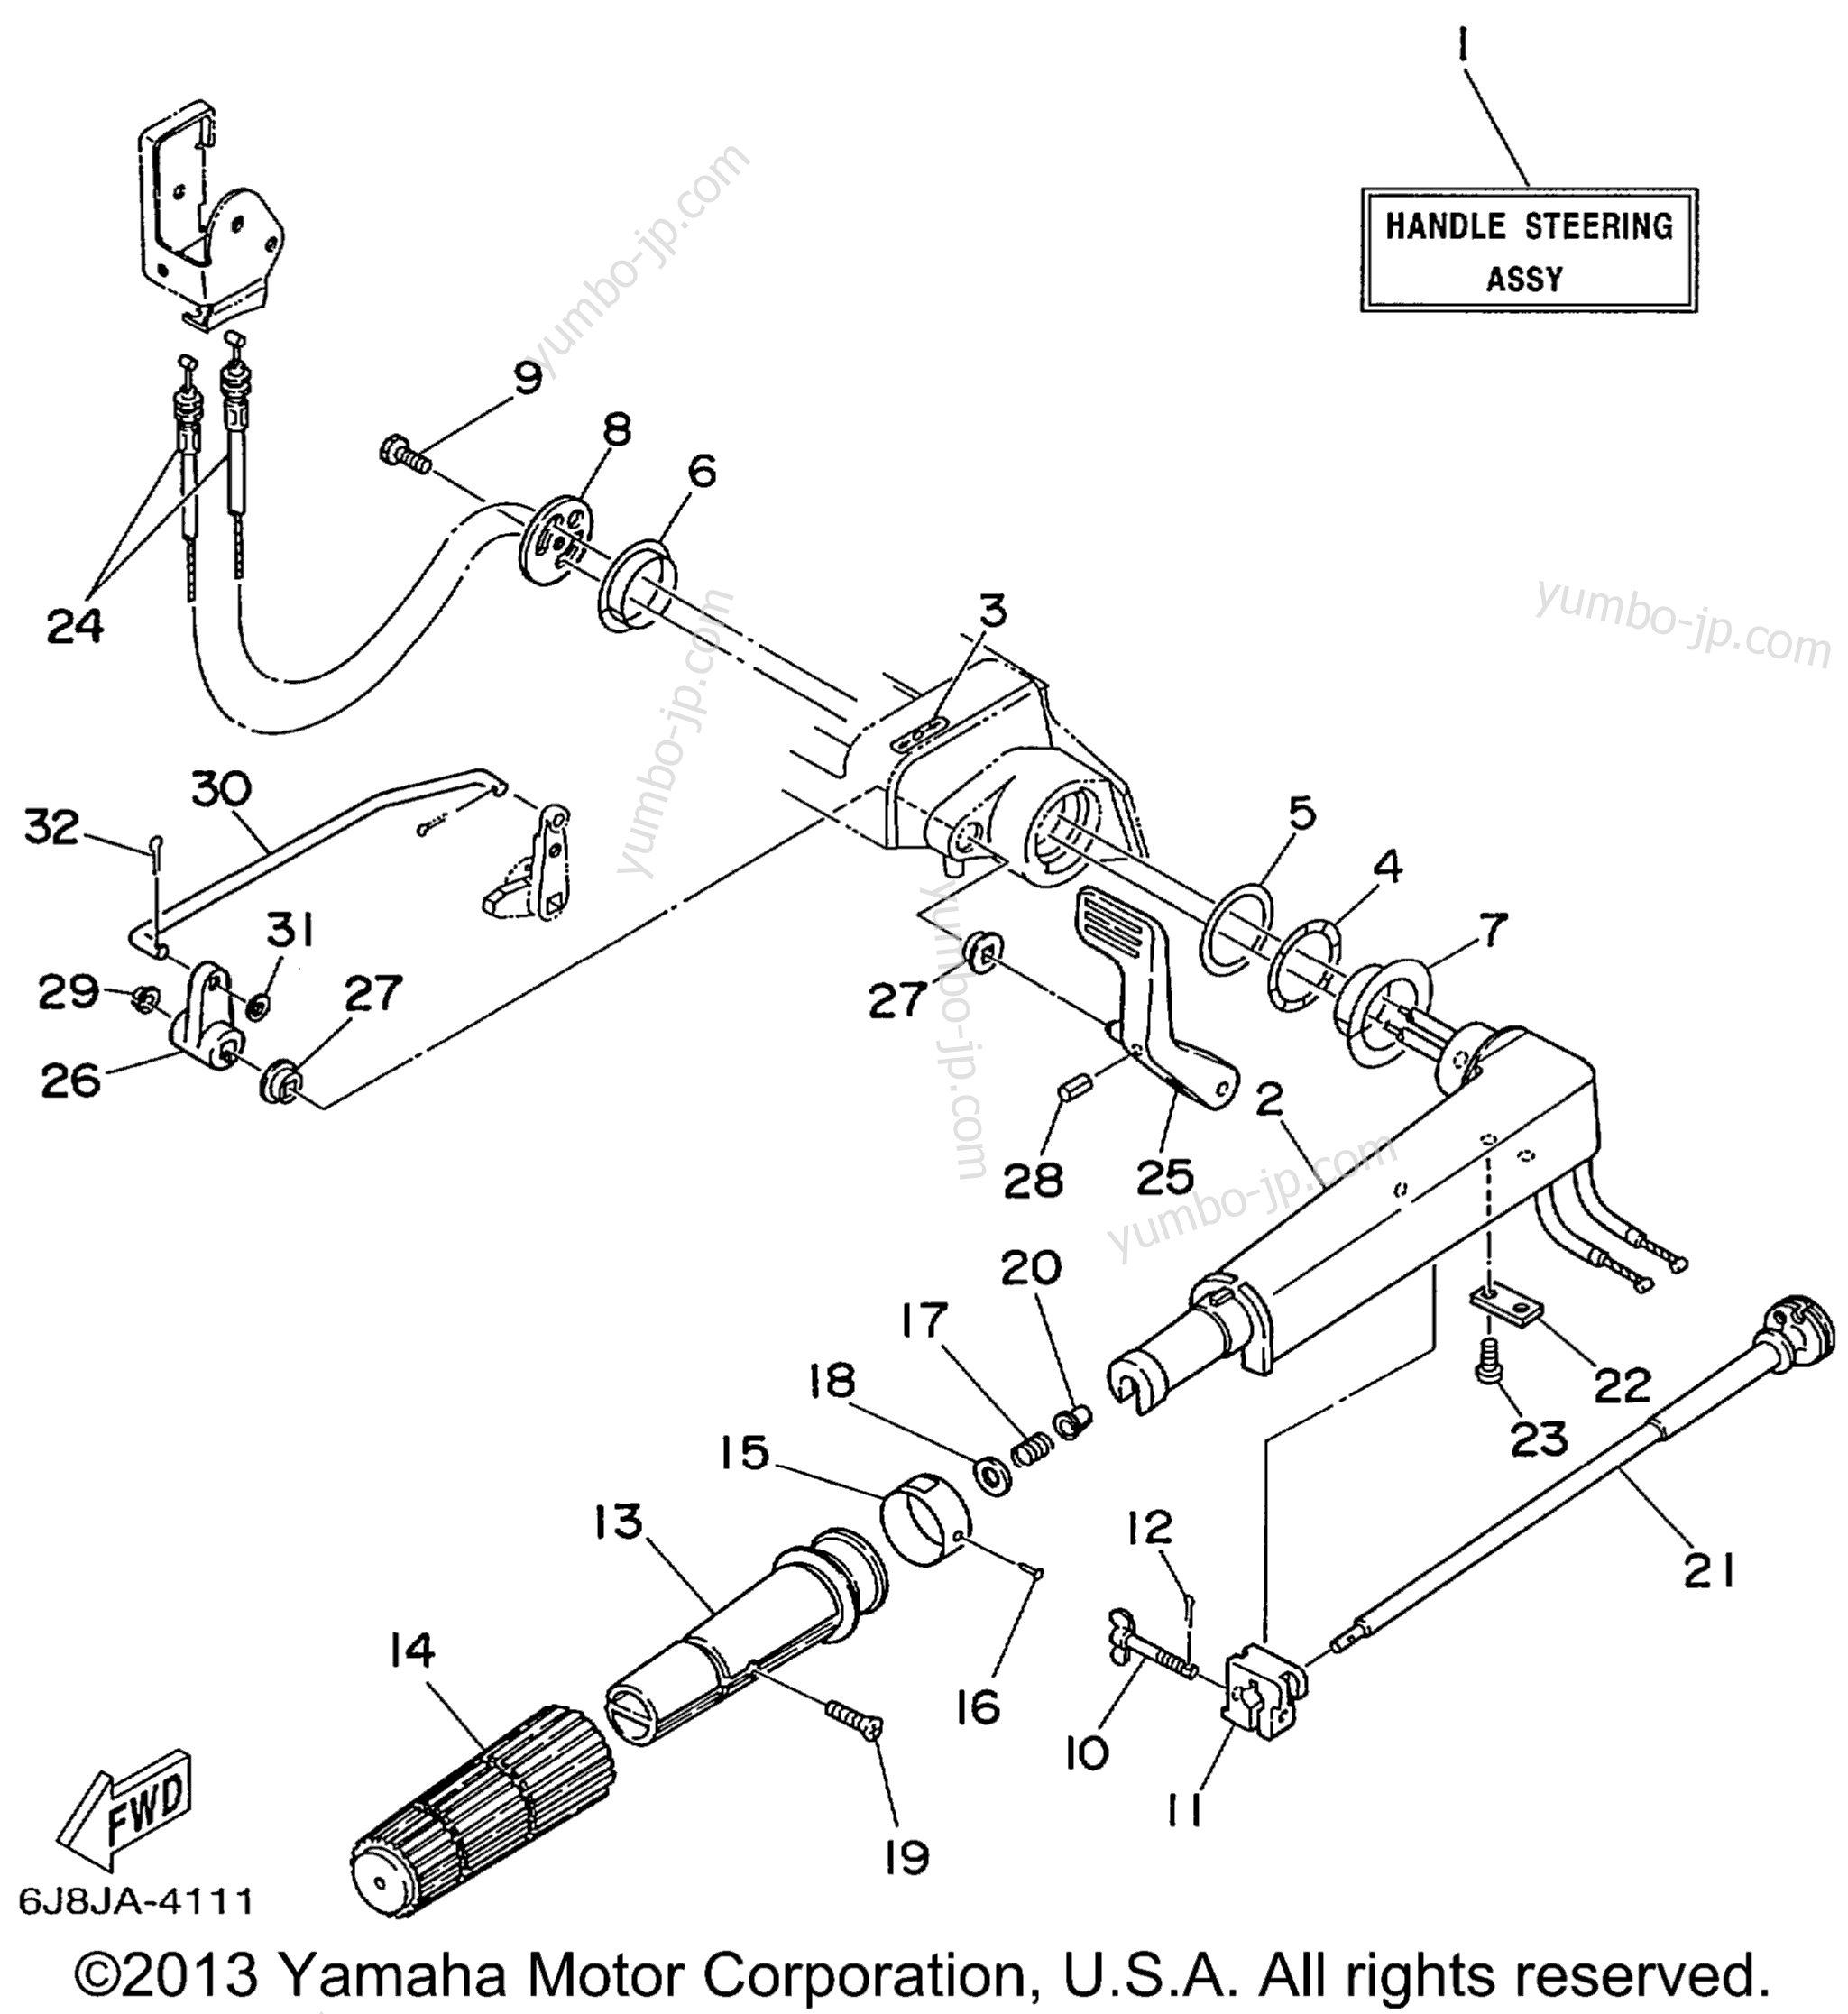 Steering for outboards YAMAHA 30MSHX_MLHX_ELHX_ELRX (30ELHX) 1999 year